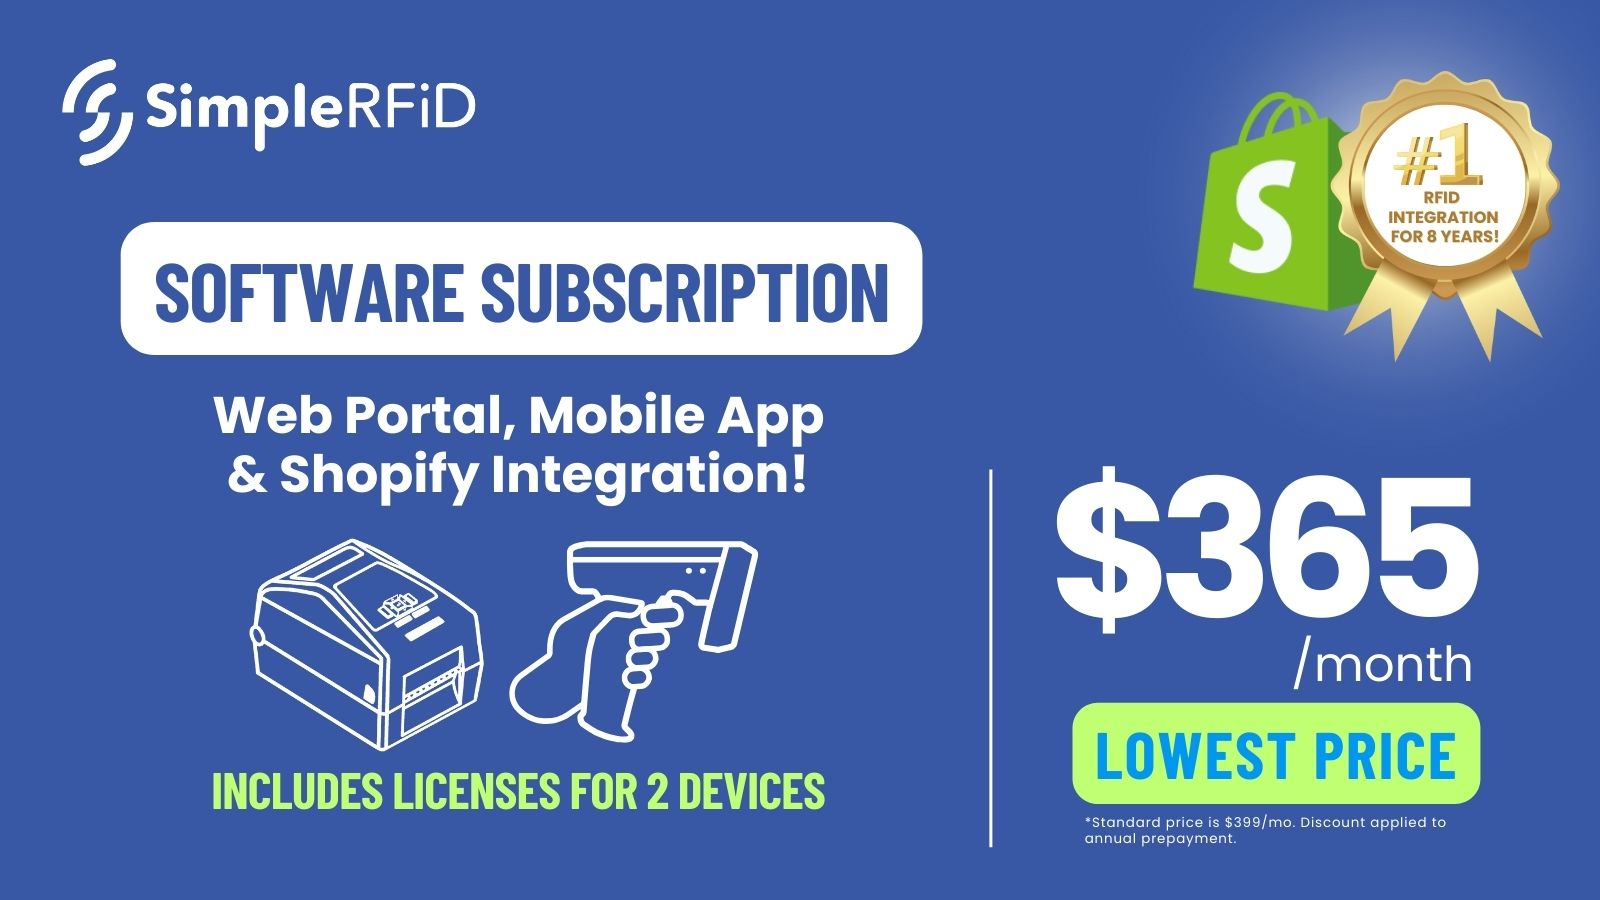 Software Subscription 2 Device License $365/mo (annual rate)